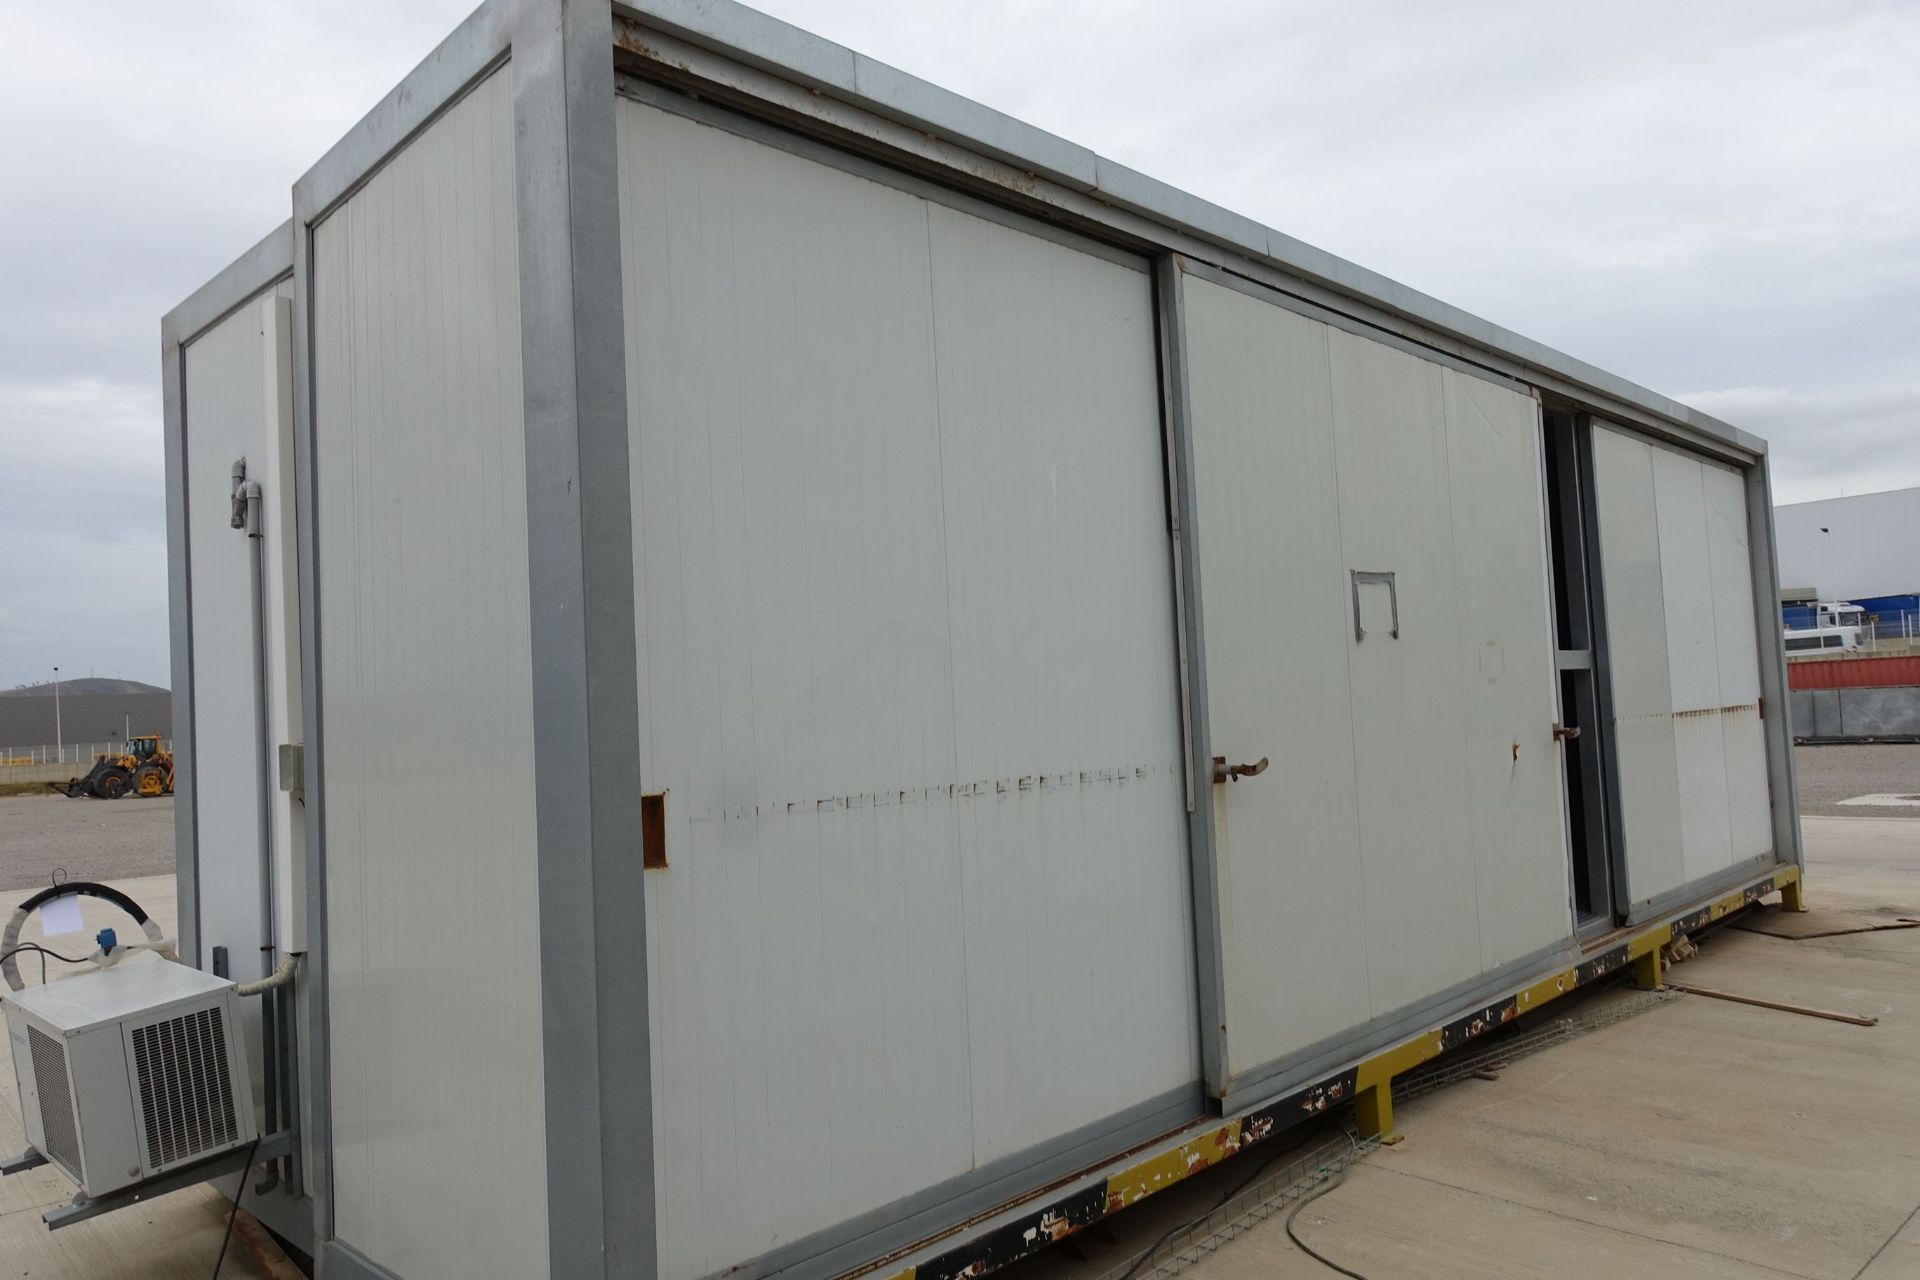 Intracon Chilled Container, 9m Long x 1.5m Deep x 3m High (aproximaely) with MDH-NF-2034A Chiller,